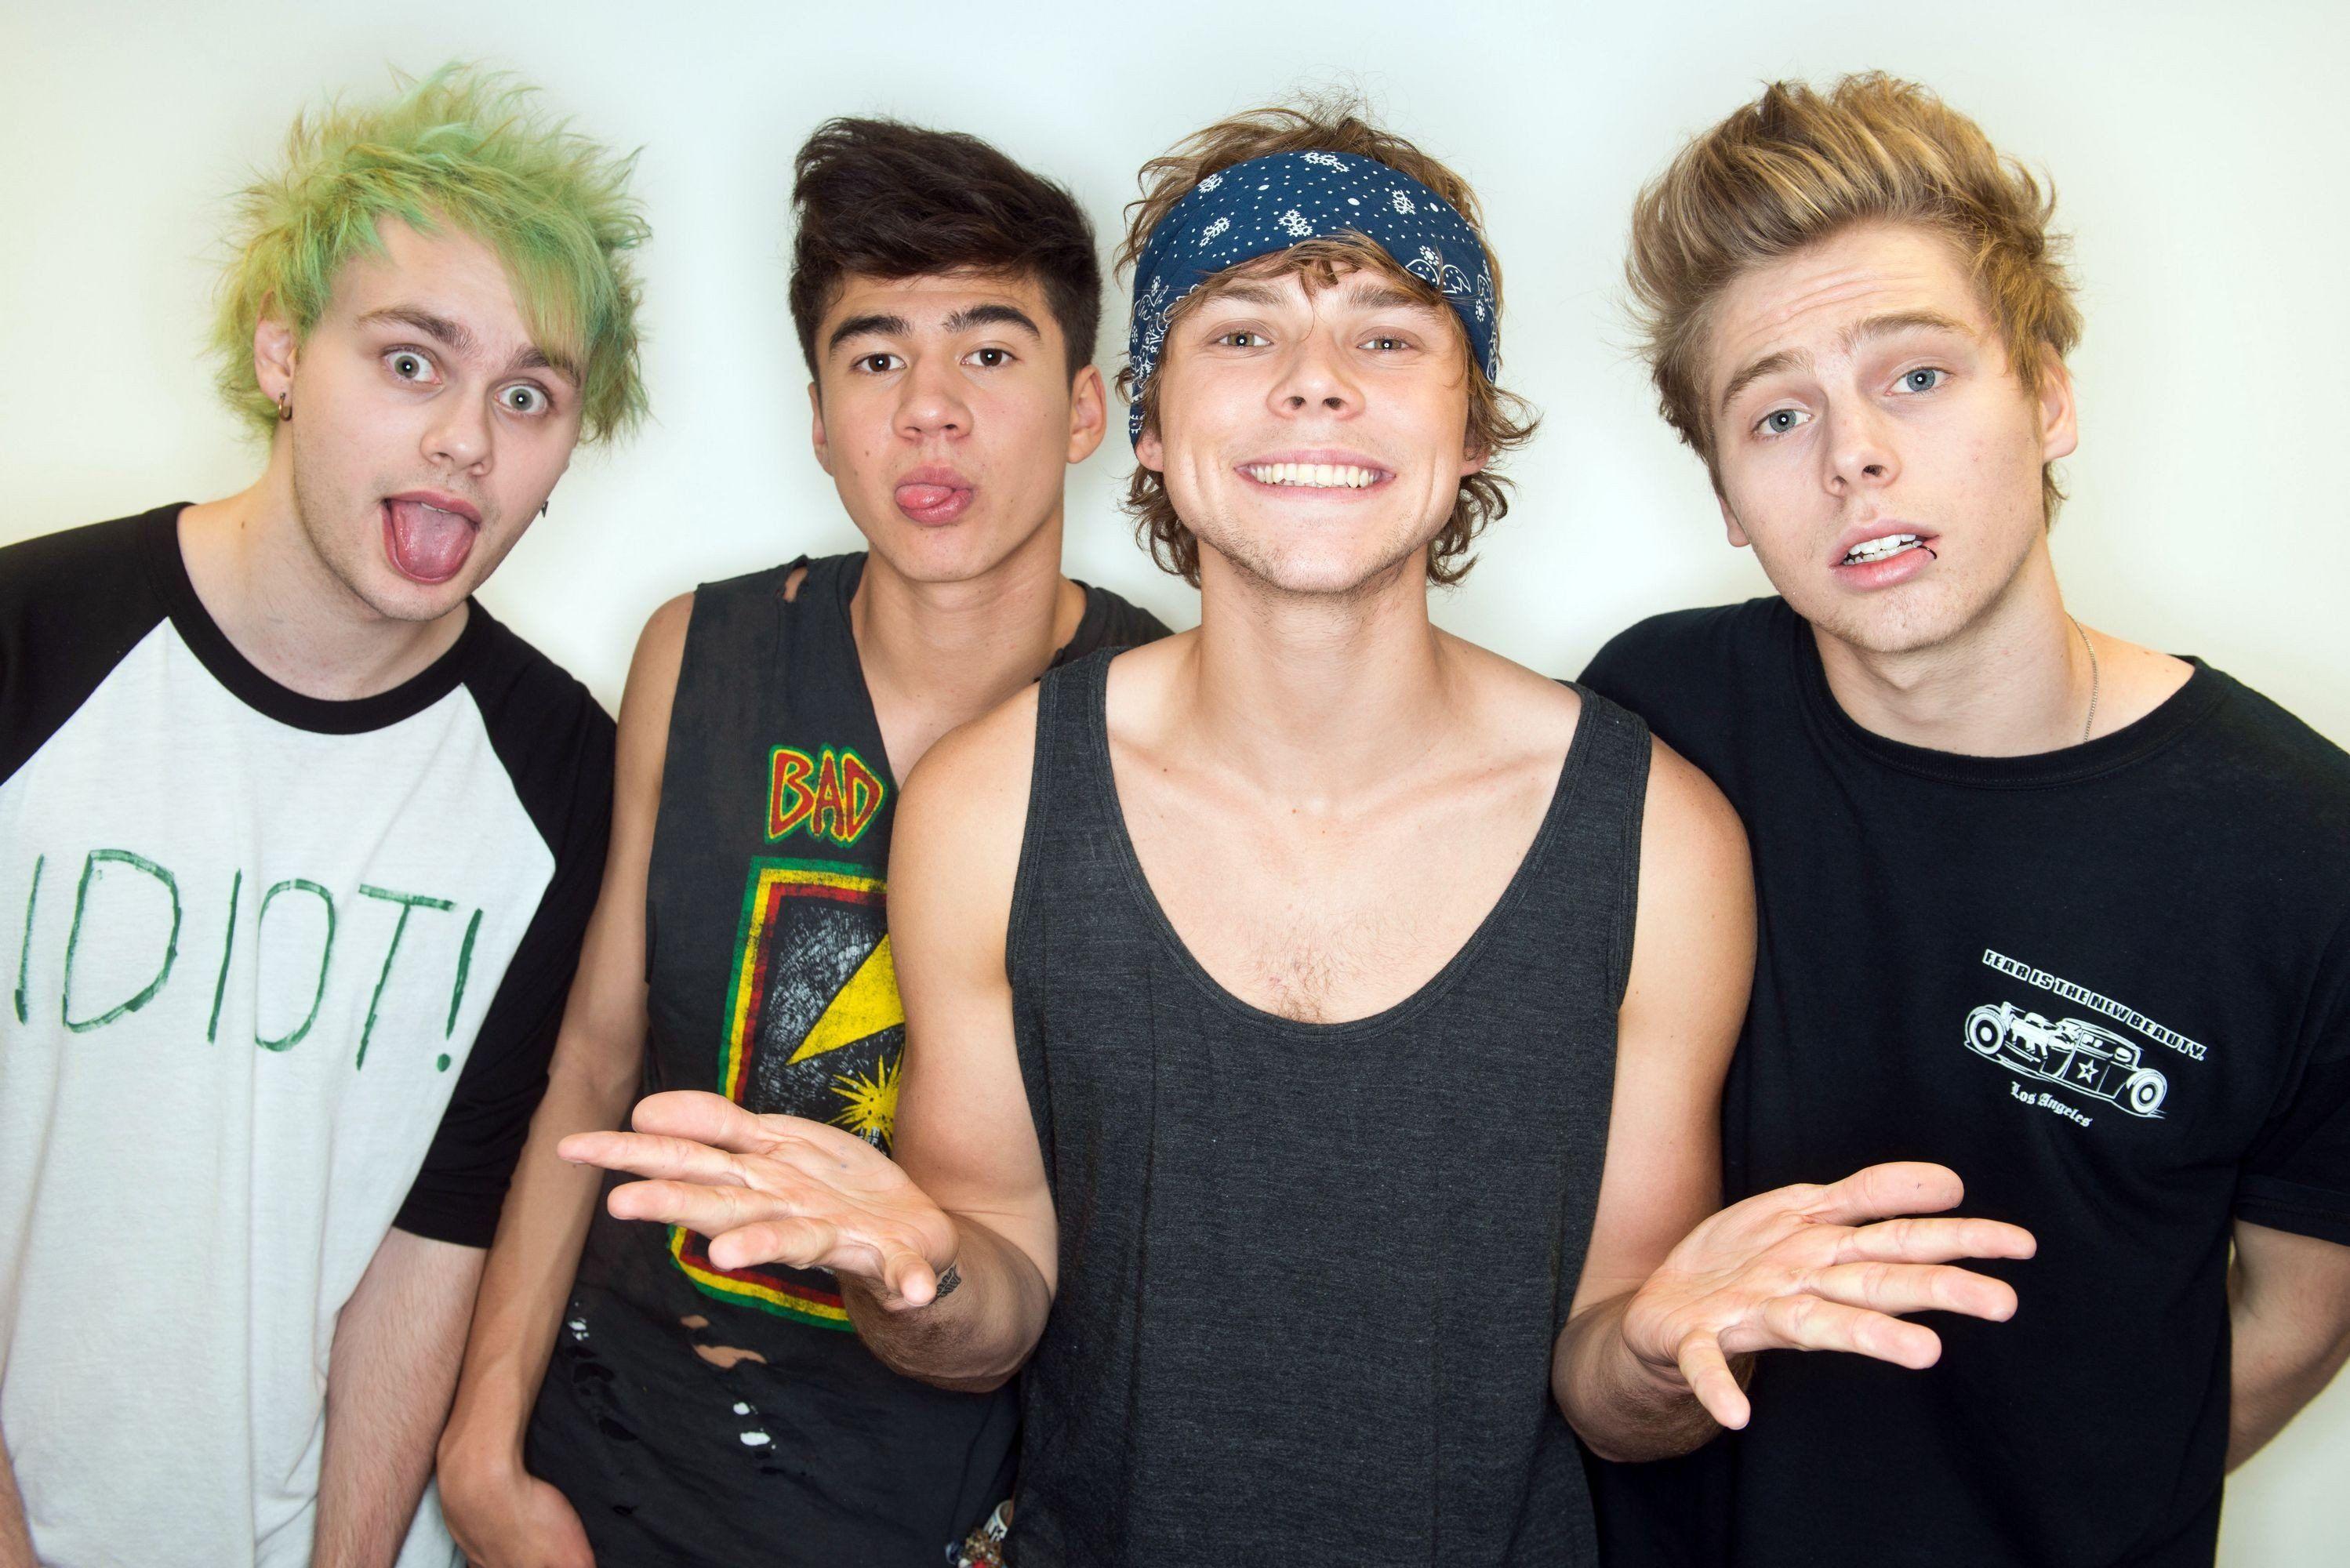 5 Seconds Of Summer Wallpapers Wallpaper Cave